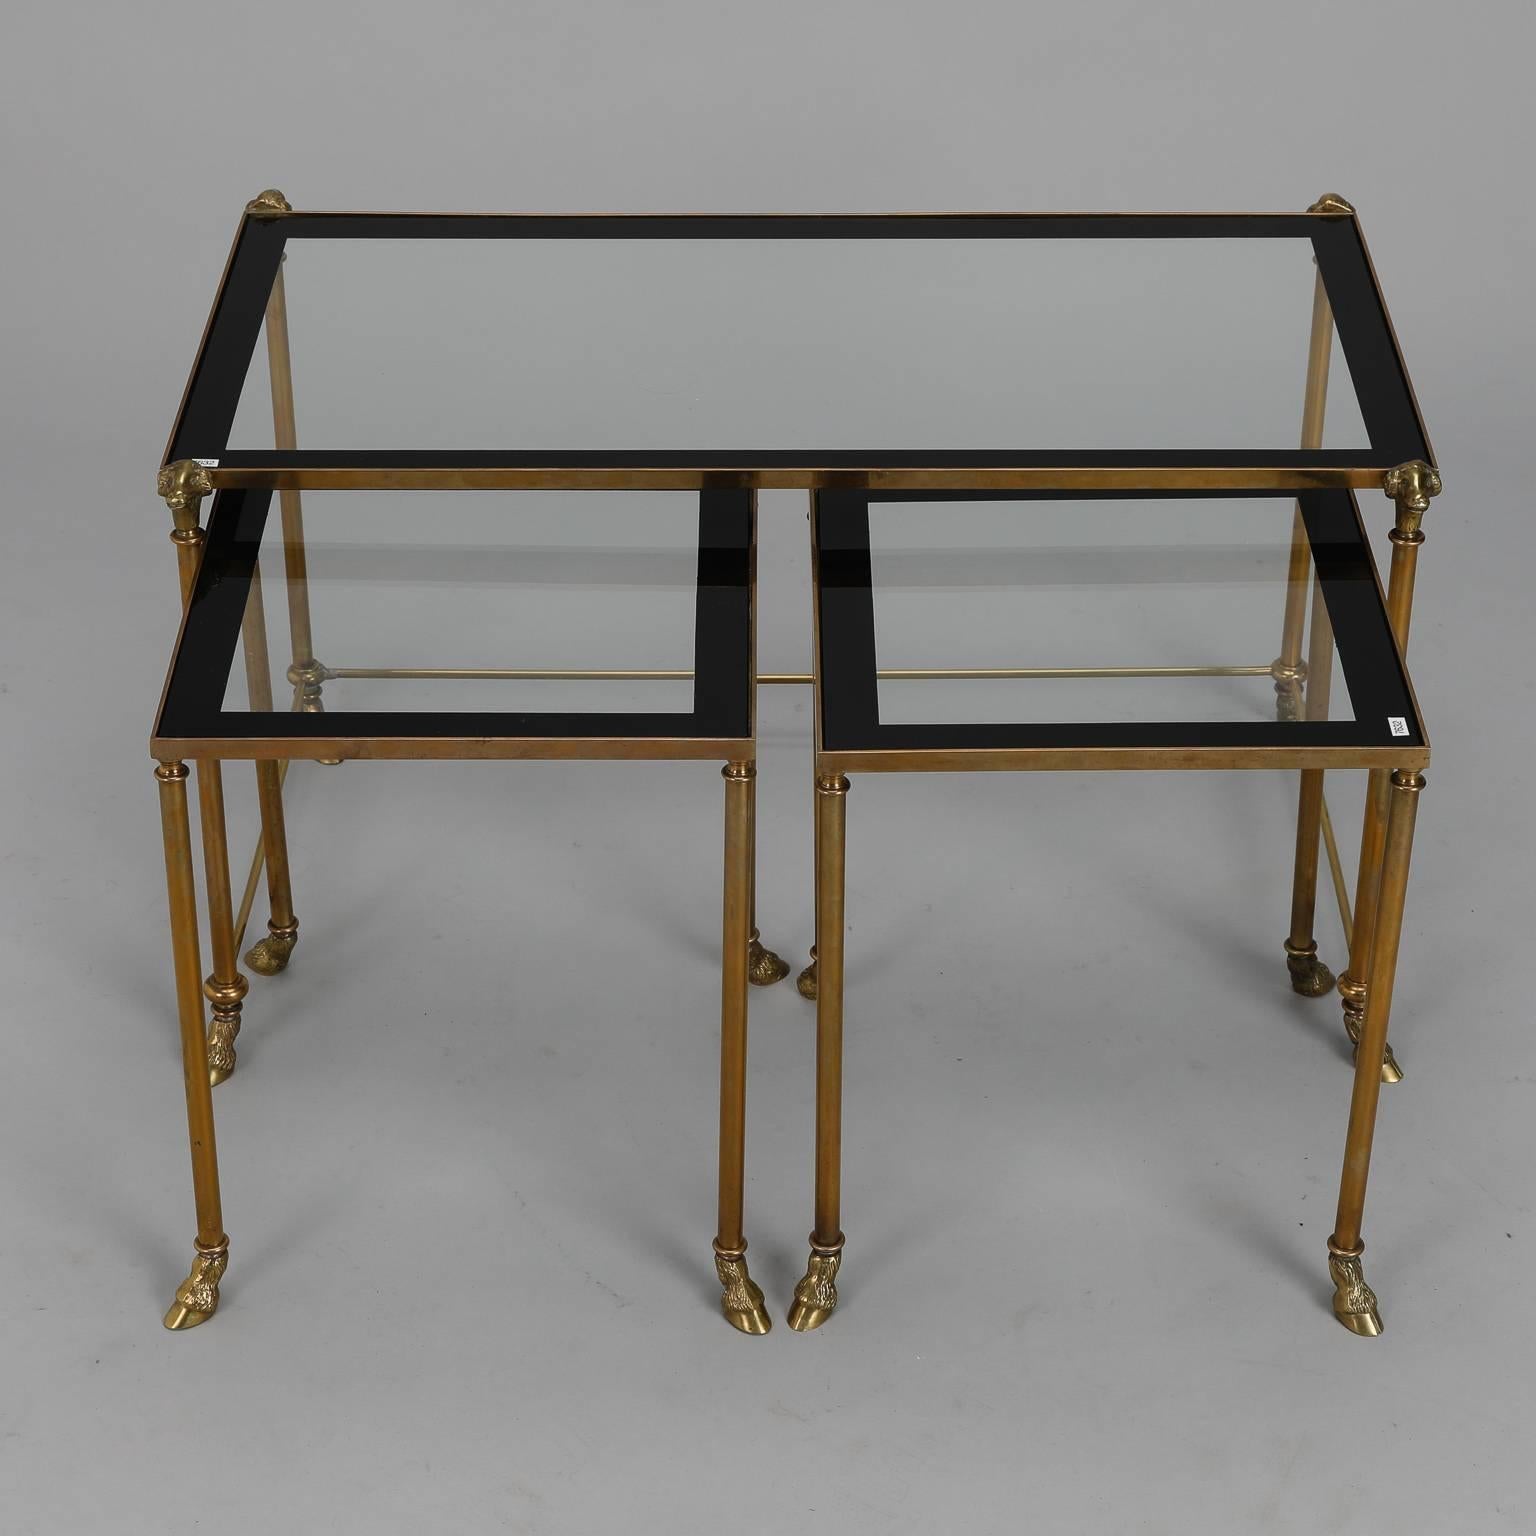 Mid-Century set of three French brass frame and glass nesting tables. Pair of two smaller tables nest side by side under larger table. The larger table has ram's heads at tops of legs. All tables have hoof form brass feet and black enamel framing